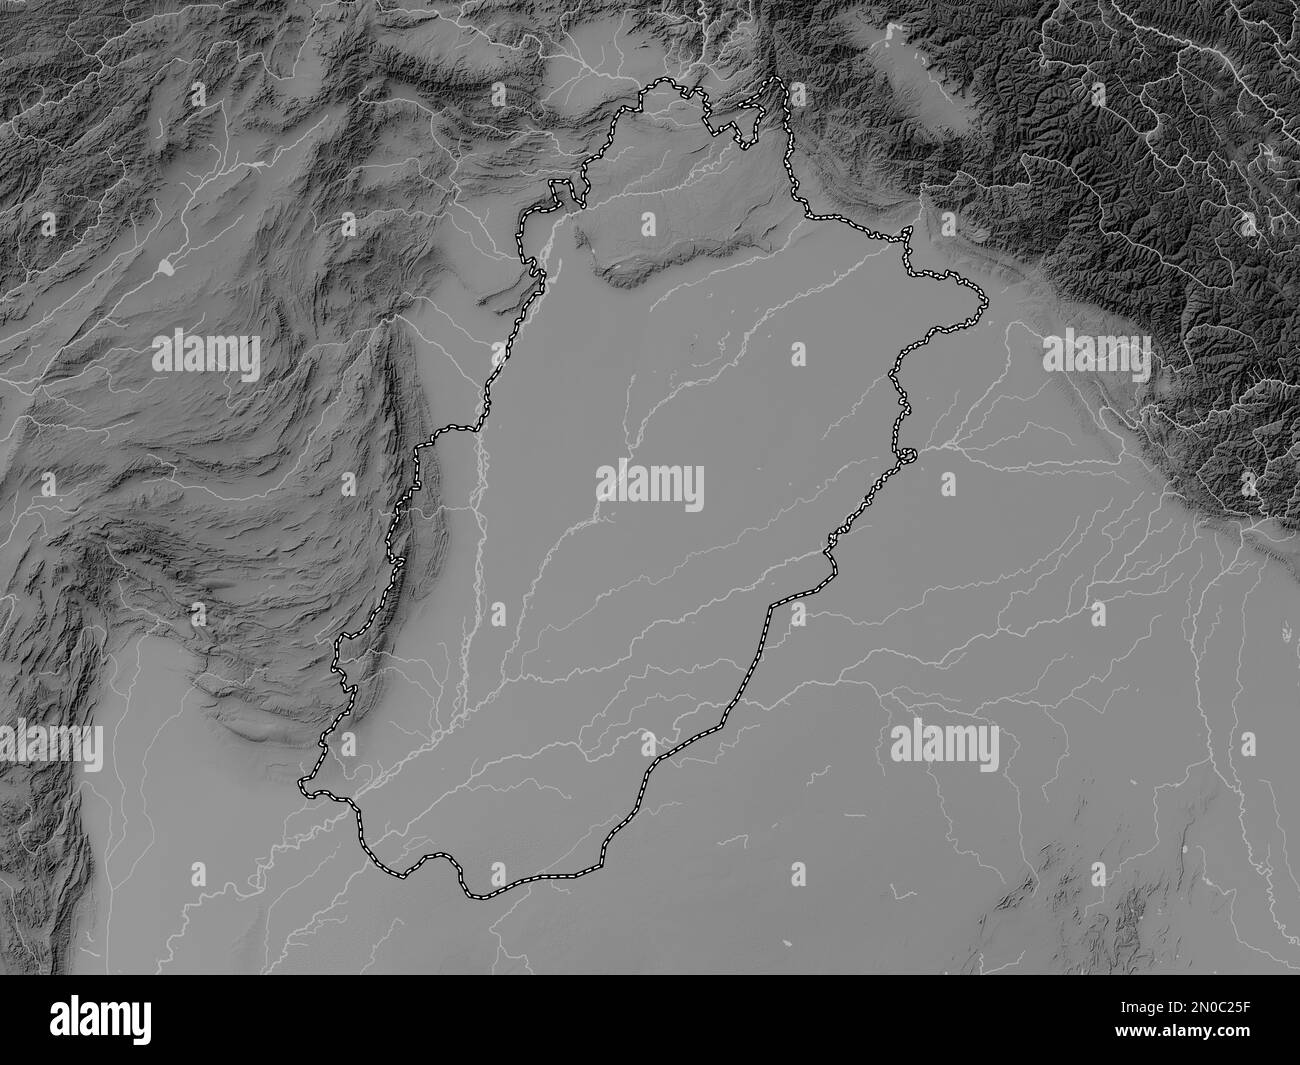 Punjab, province of Pakistan. Grayscale elevation map with lakes and rivers Stock Photo